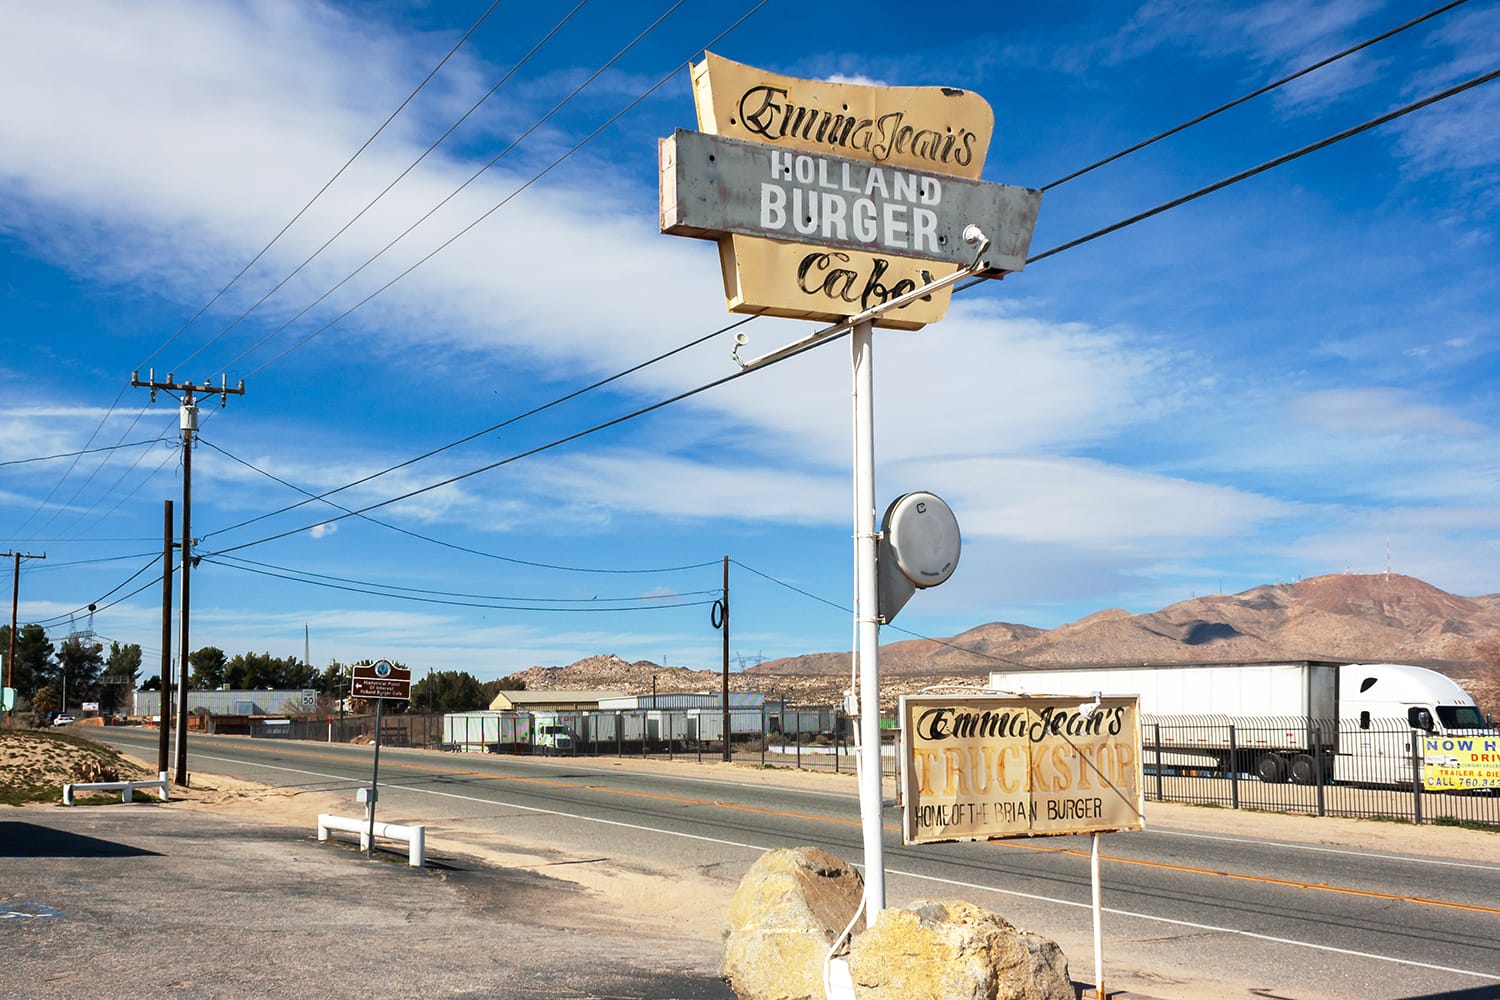 Vintage sign for Emma Jean's Holland Burger Cafe, in Victorville, California on San Bernardino County Road 66, also known as Route 66.